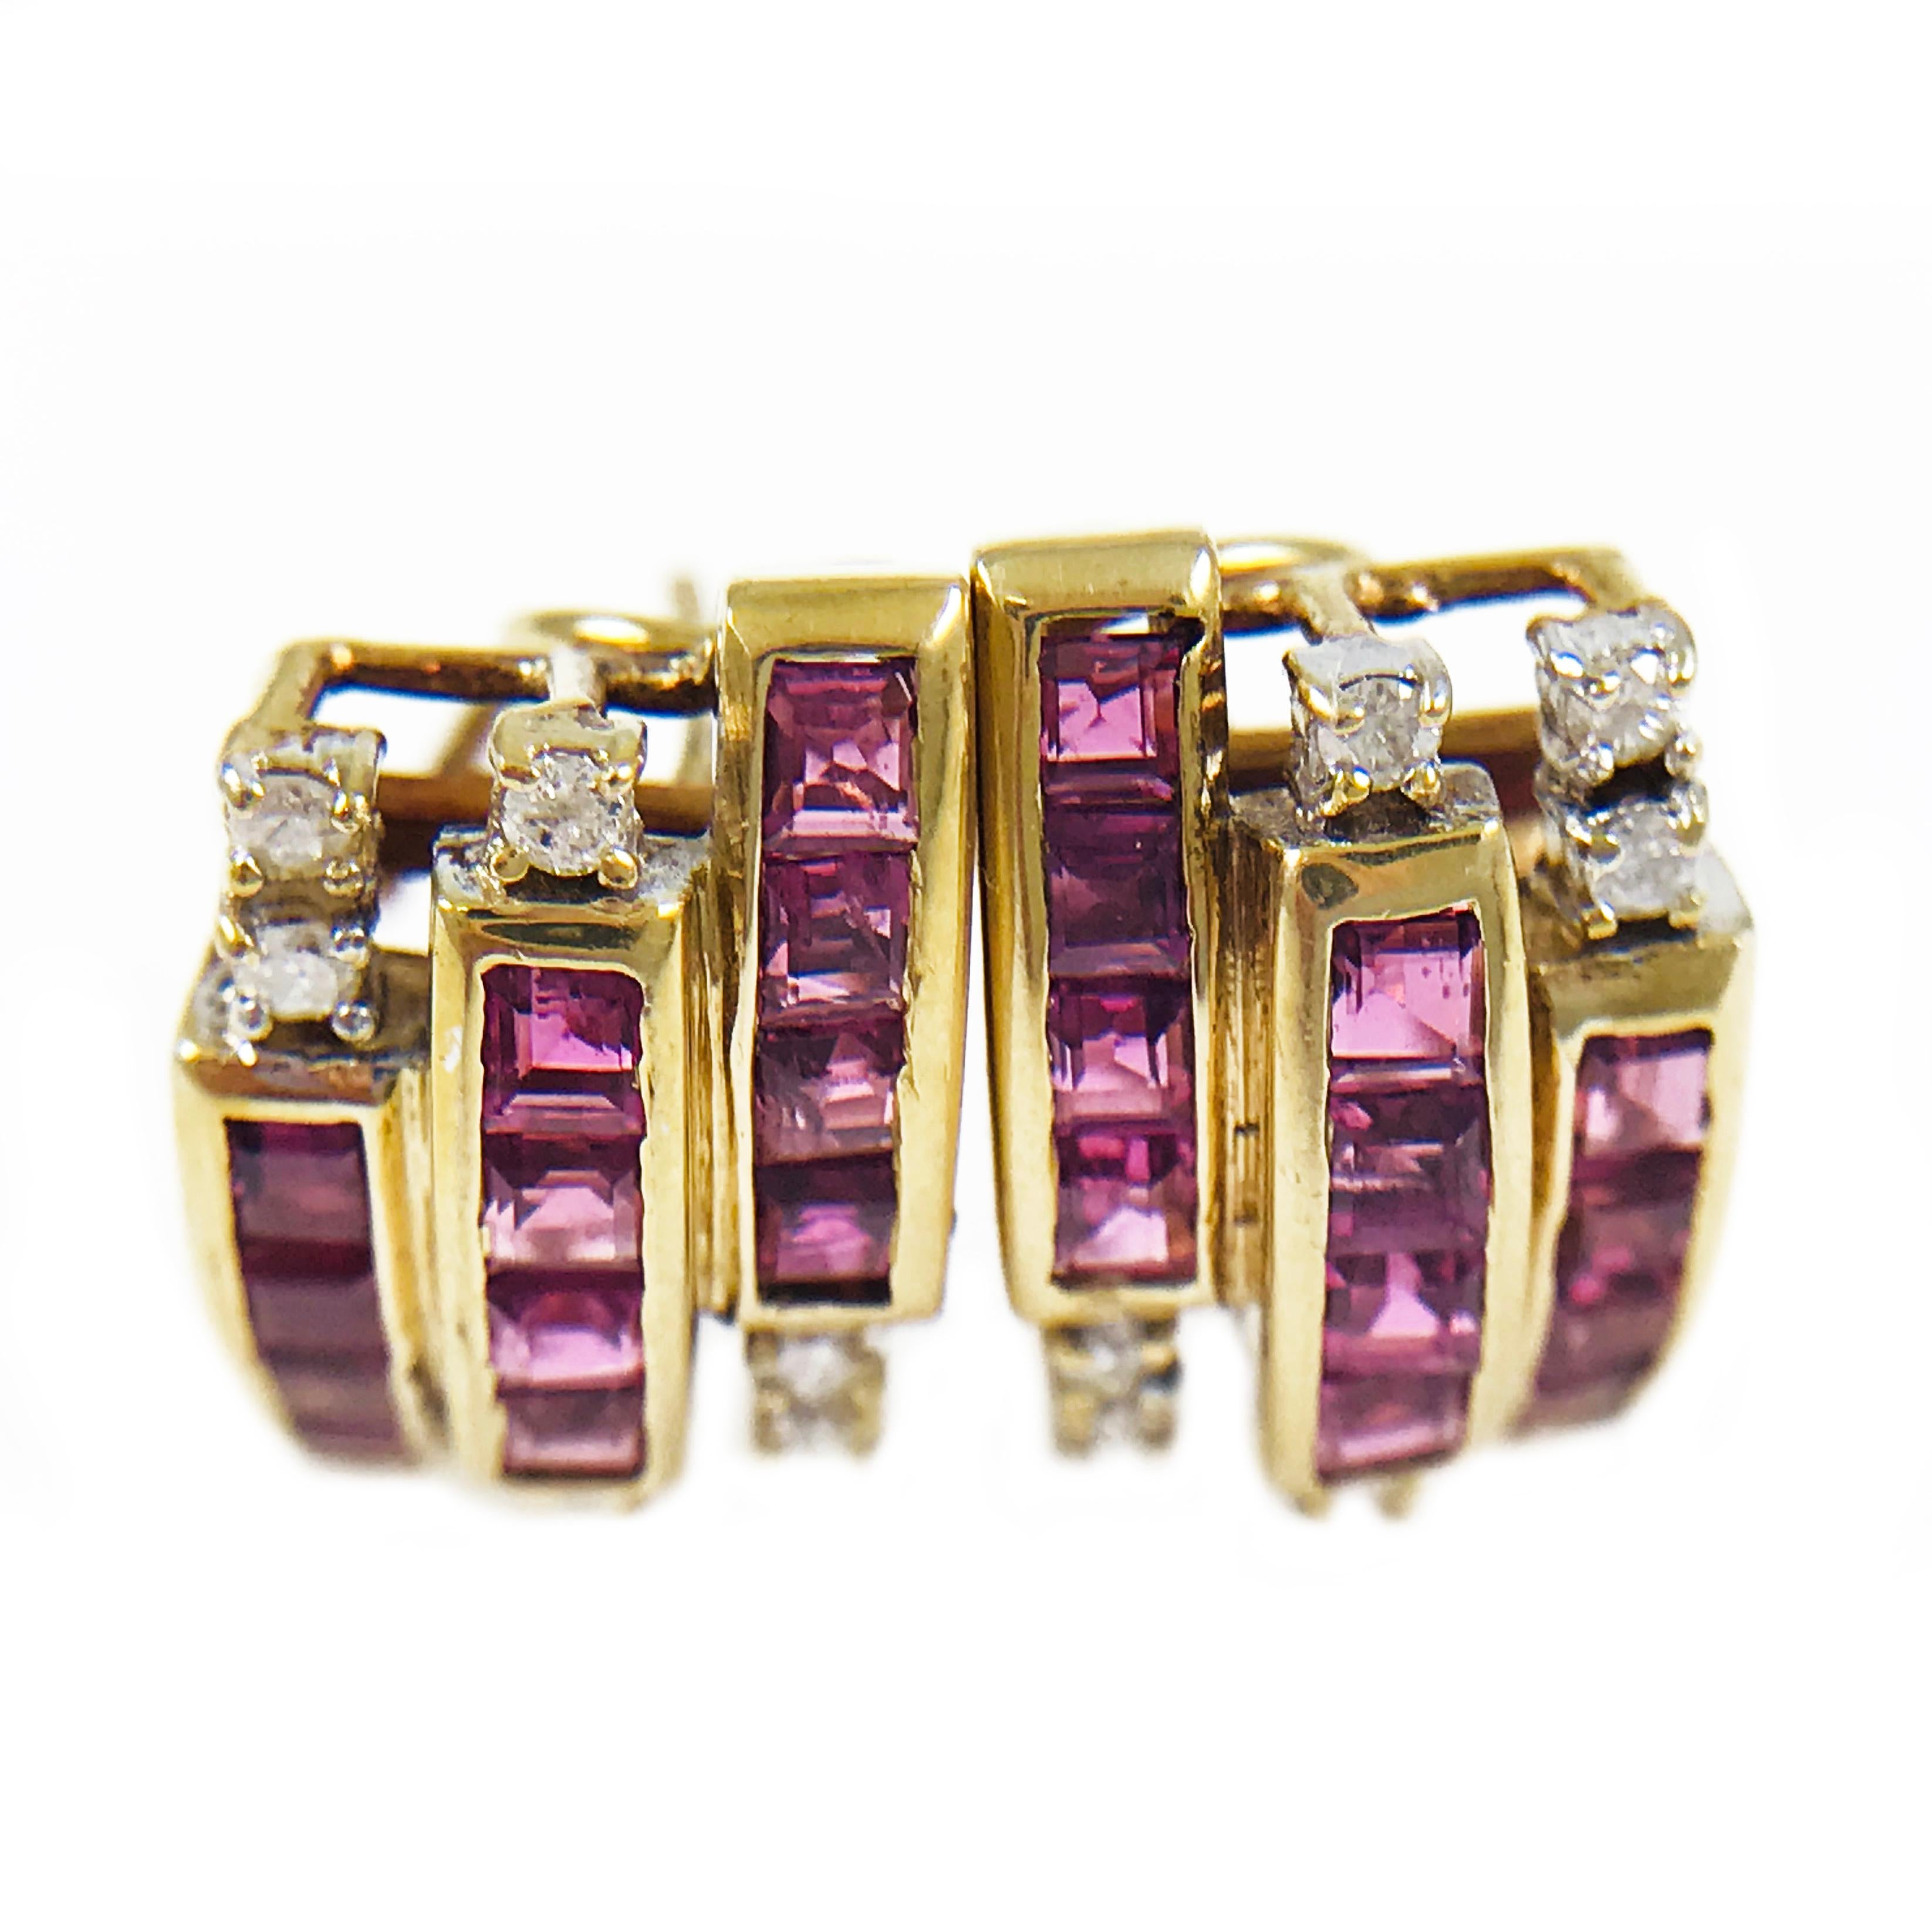 14 Karat Ruby Diamond Clip-On Earrings. Princess cut Rubies channel set in three rows. The total carat weight of the Rubies is 0.40ctw. The total carat weight of the twelve round brilliant cut diamonds is 0.12ctw. These sparkling earrings have a